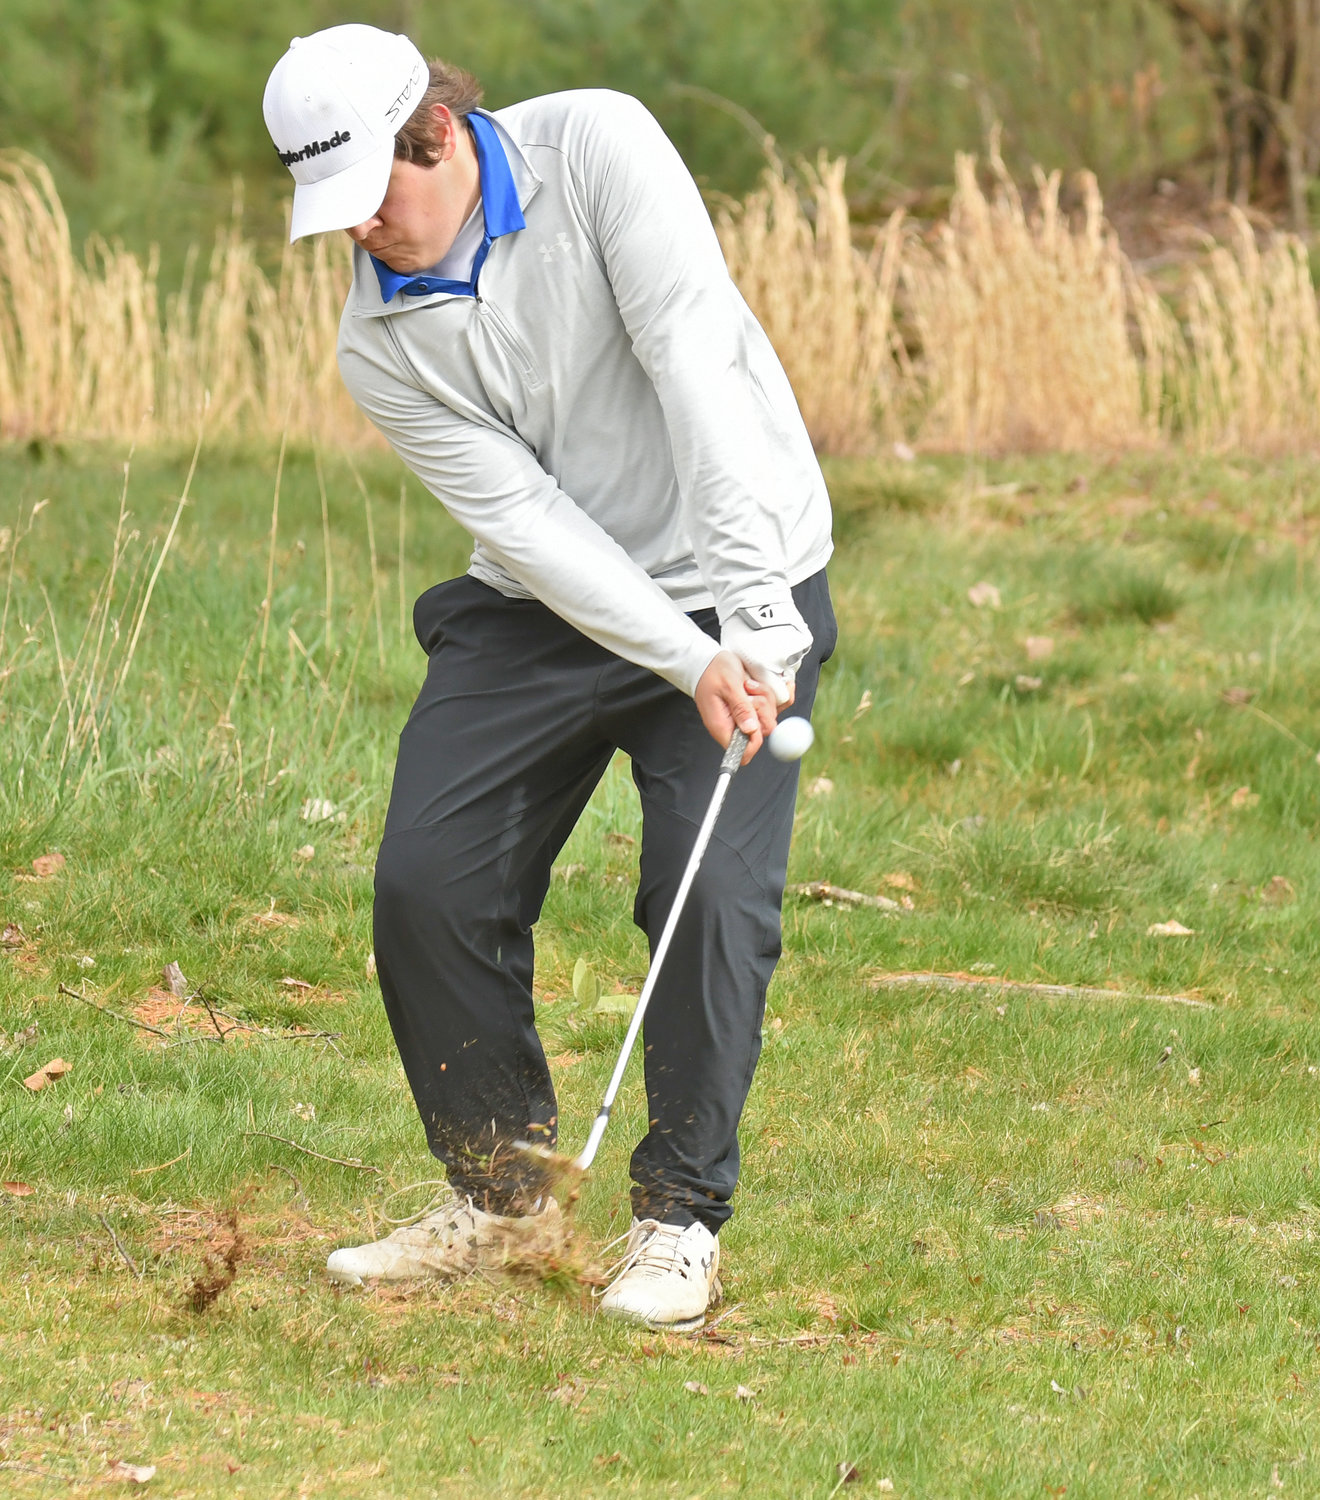 GOING FOR THE GREEN — Whitesboro’s Chris Stilwell chips to the 11th green in the Warriors’ match against Rome Free Academy at Rome Country Club Wednesday. Stillwell shot a 42, one stroke behind Mike Stilwell’s 41. The Warriors won 229 to 280.